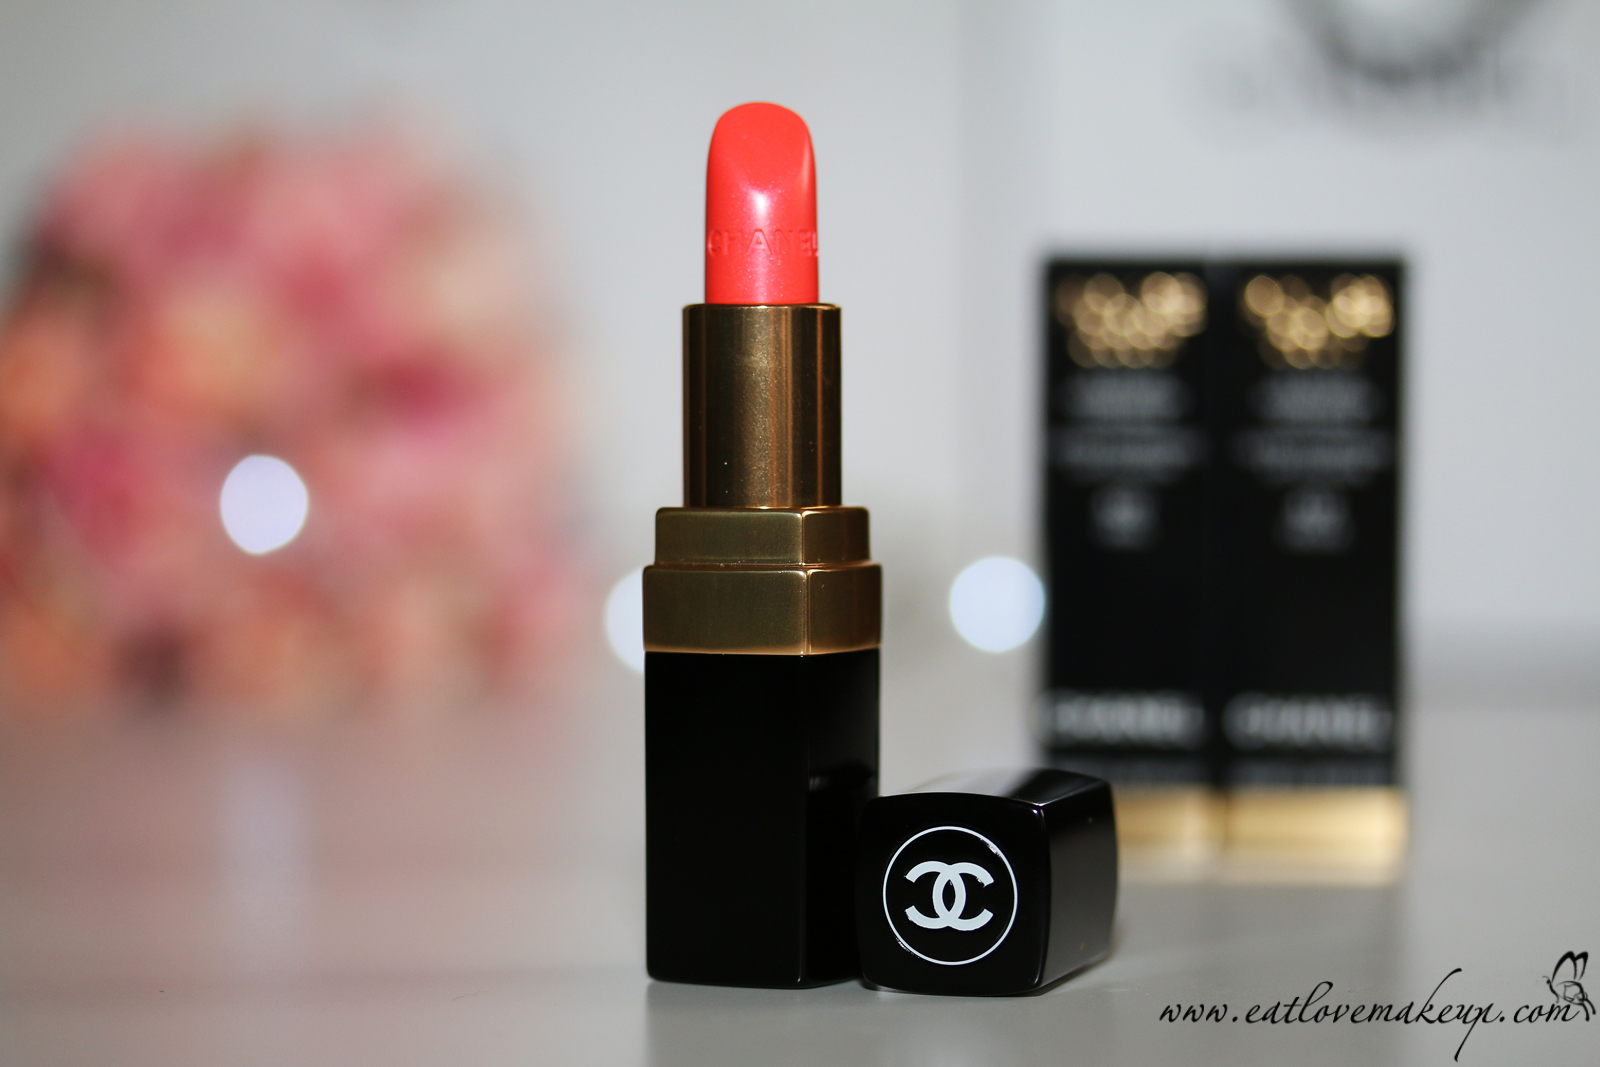 Chanel Rouge Coco 2015